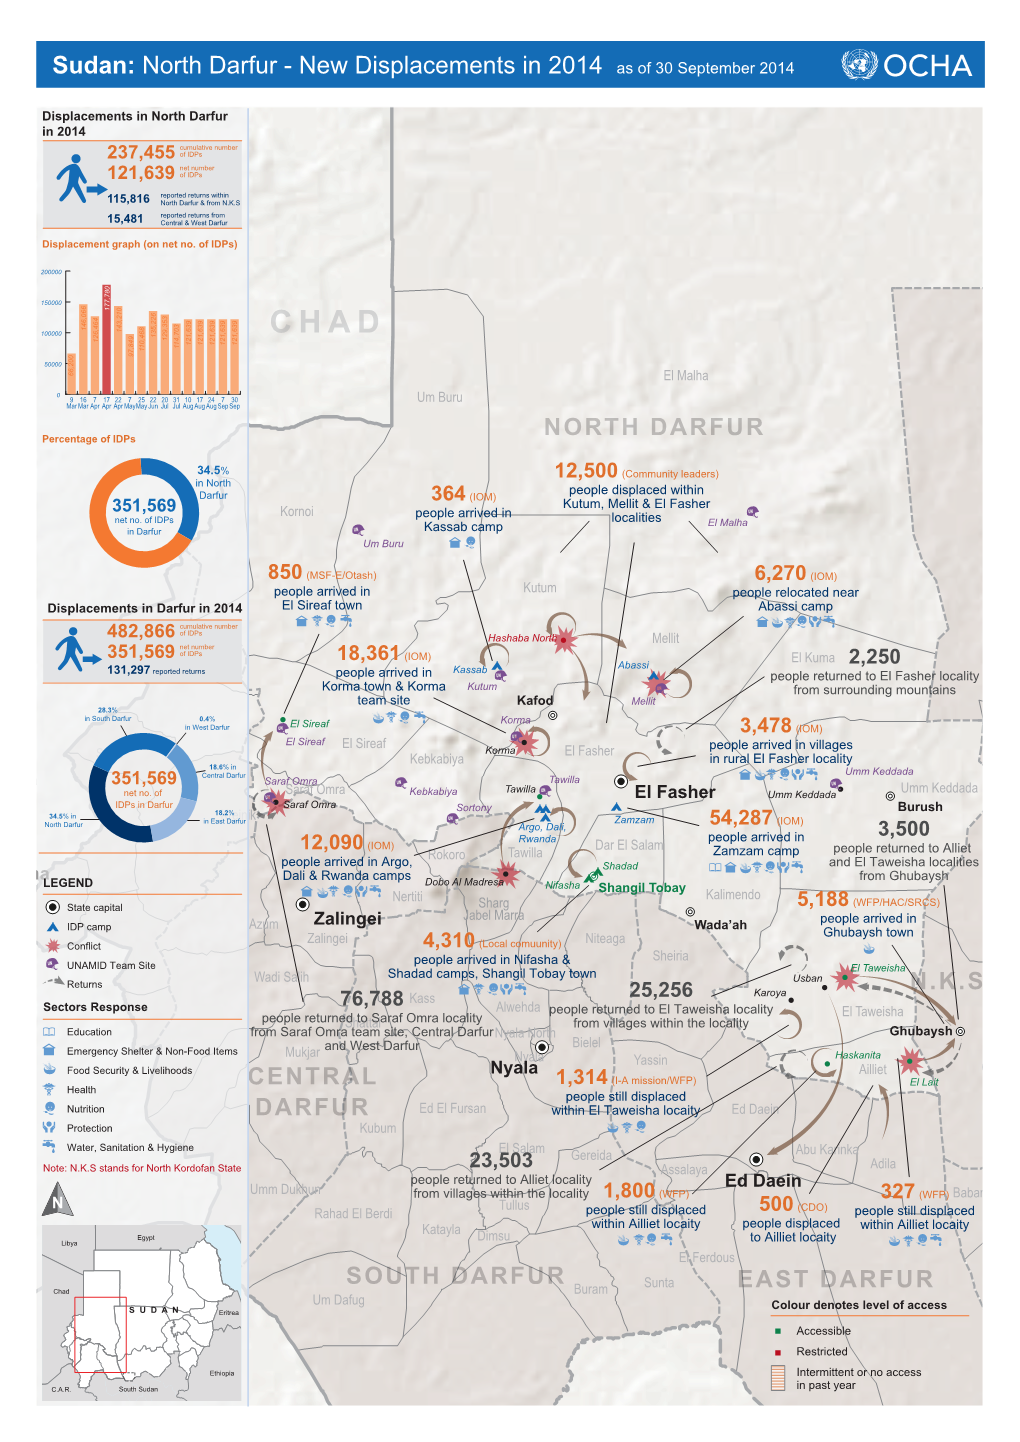 North Darfur - New Displacements in 2014 As of 30 September 2014